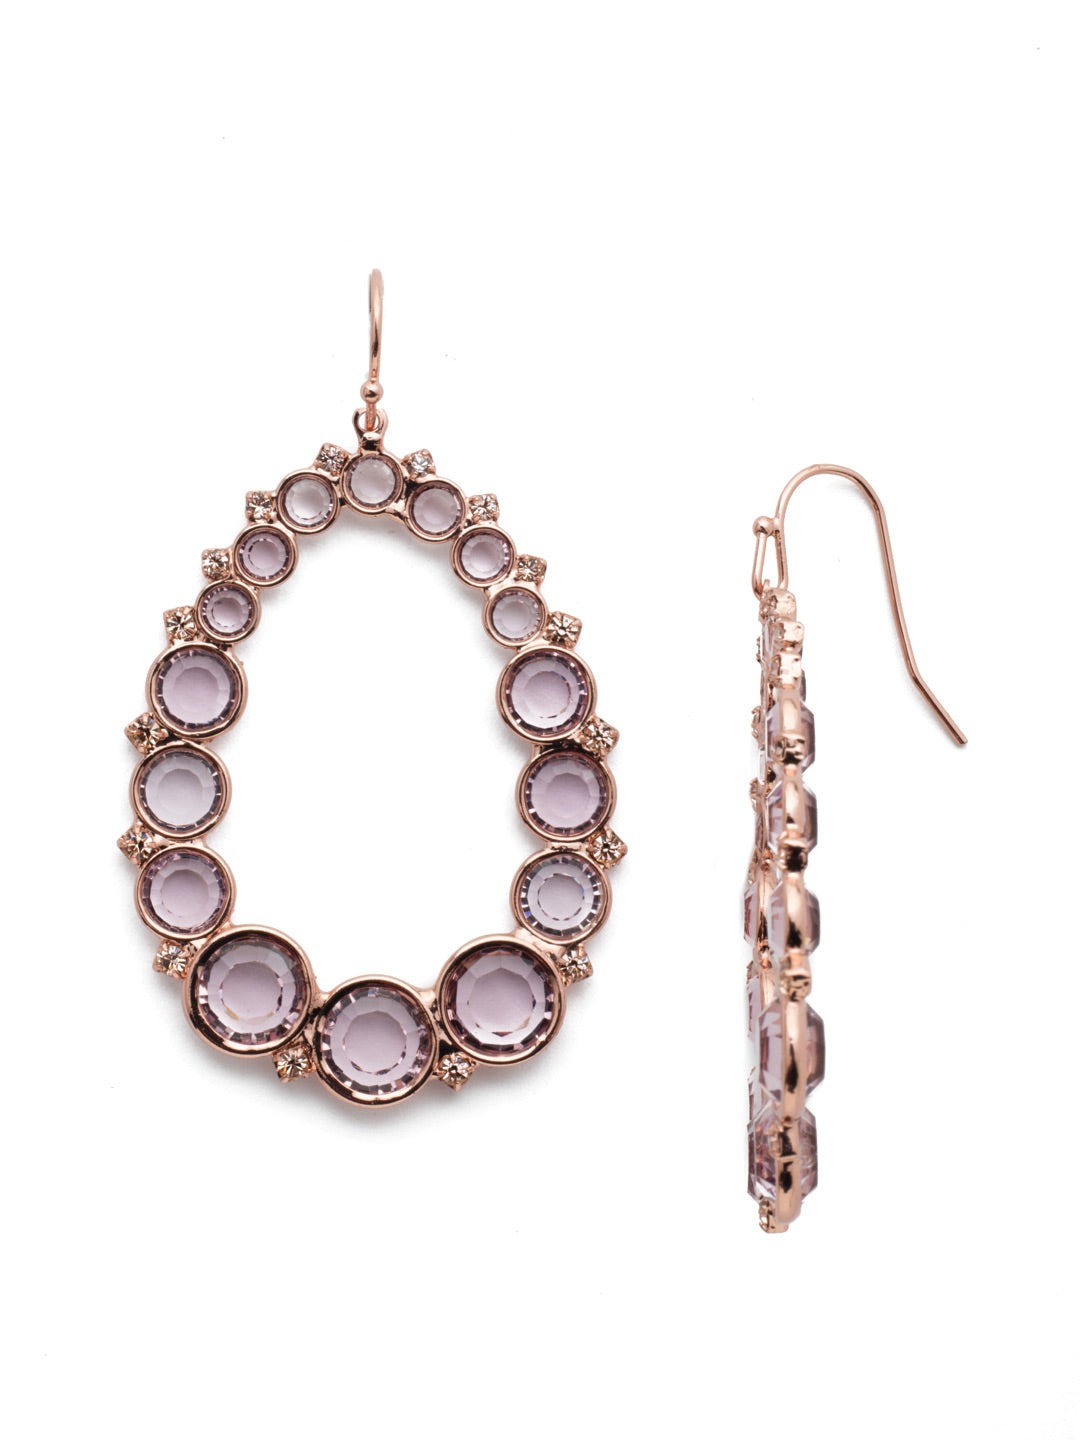 Amari Statement Earring - EES170RGLVP - Put on the Amari Dangle Earrings when you want to WOW. Stunning clear gems are offset by drops of sparkling crystals in this must-have set. From Sorrelli's Lavender Peach collection in our Rose Gold-tone finish.